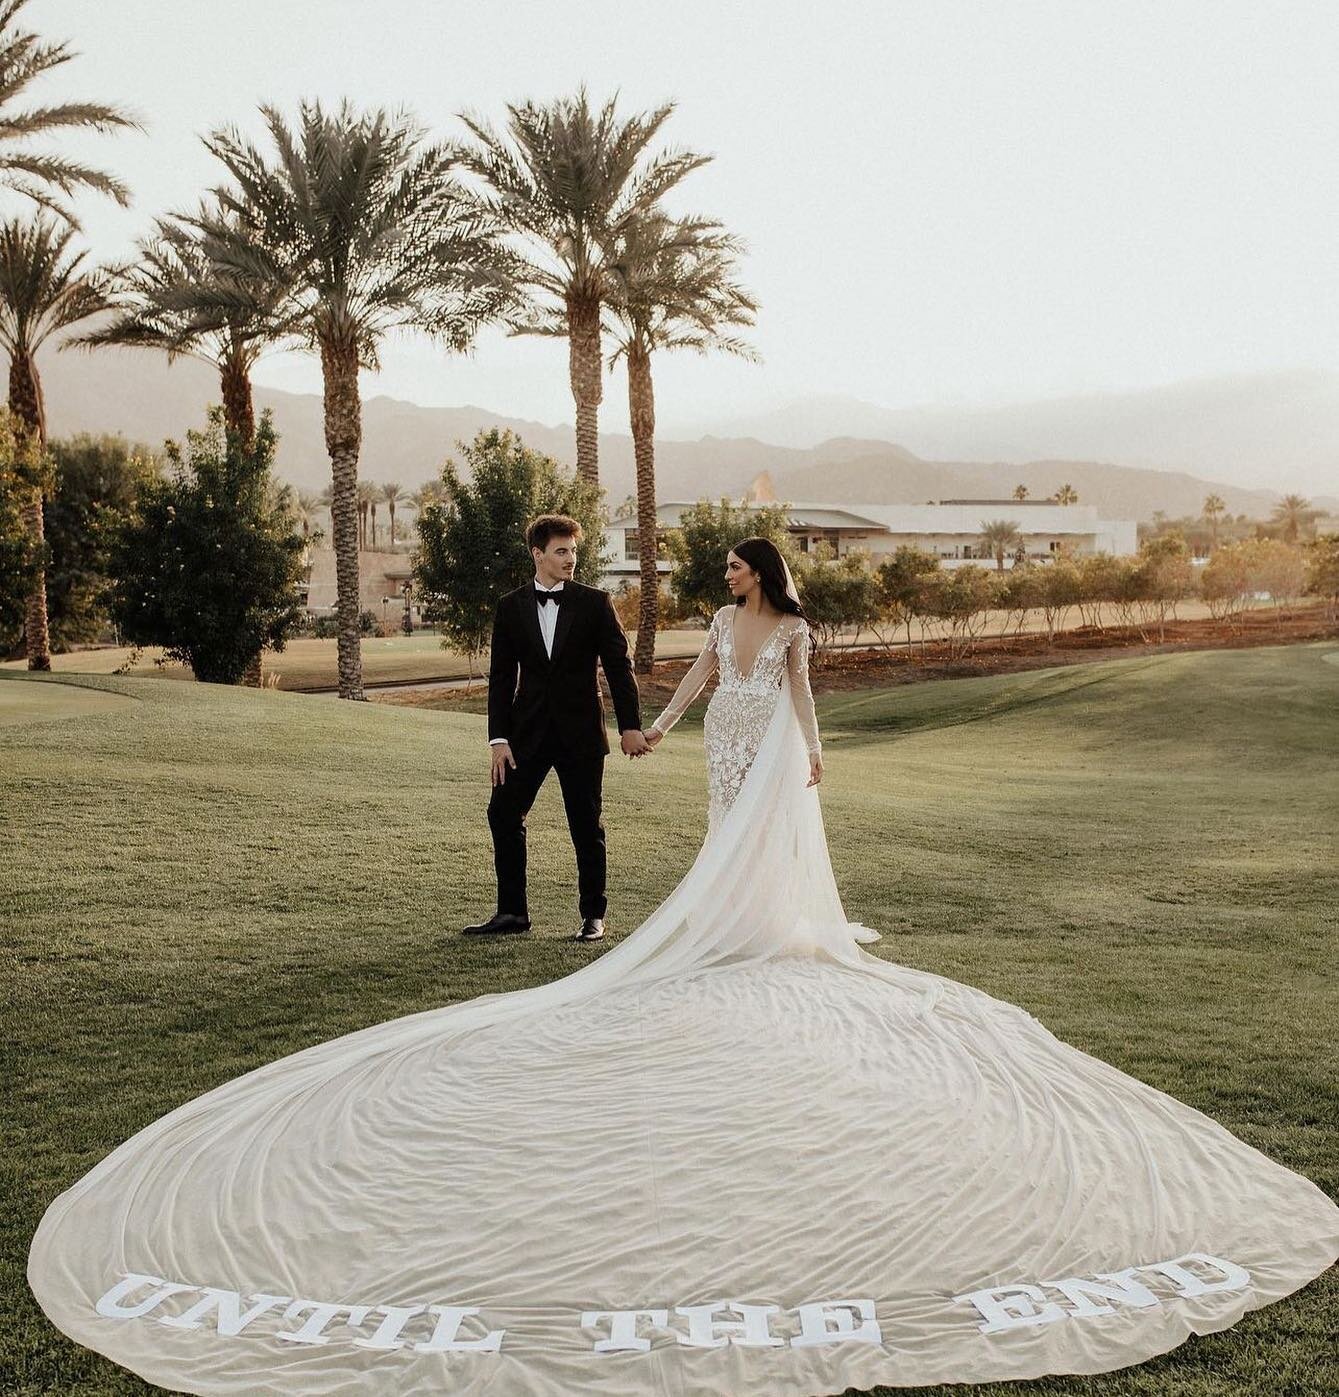 Congratulations to @gretzieparth &amp; @markwarawa I am so happy our vision for your veil came to life perfectly 💗💗💗 Photo @katch_studios  Dress @berta  Suit @conxeppt  Makeup @glamartistryinc